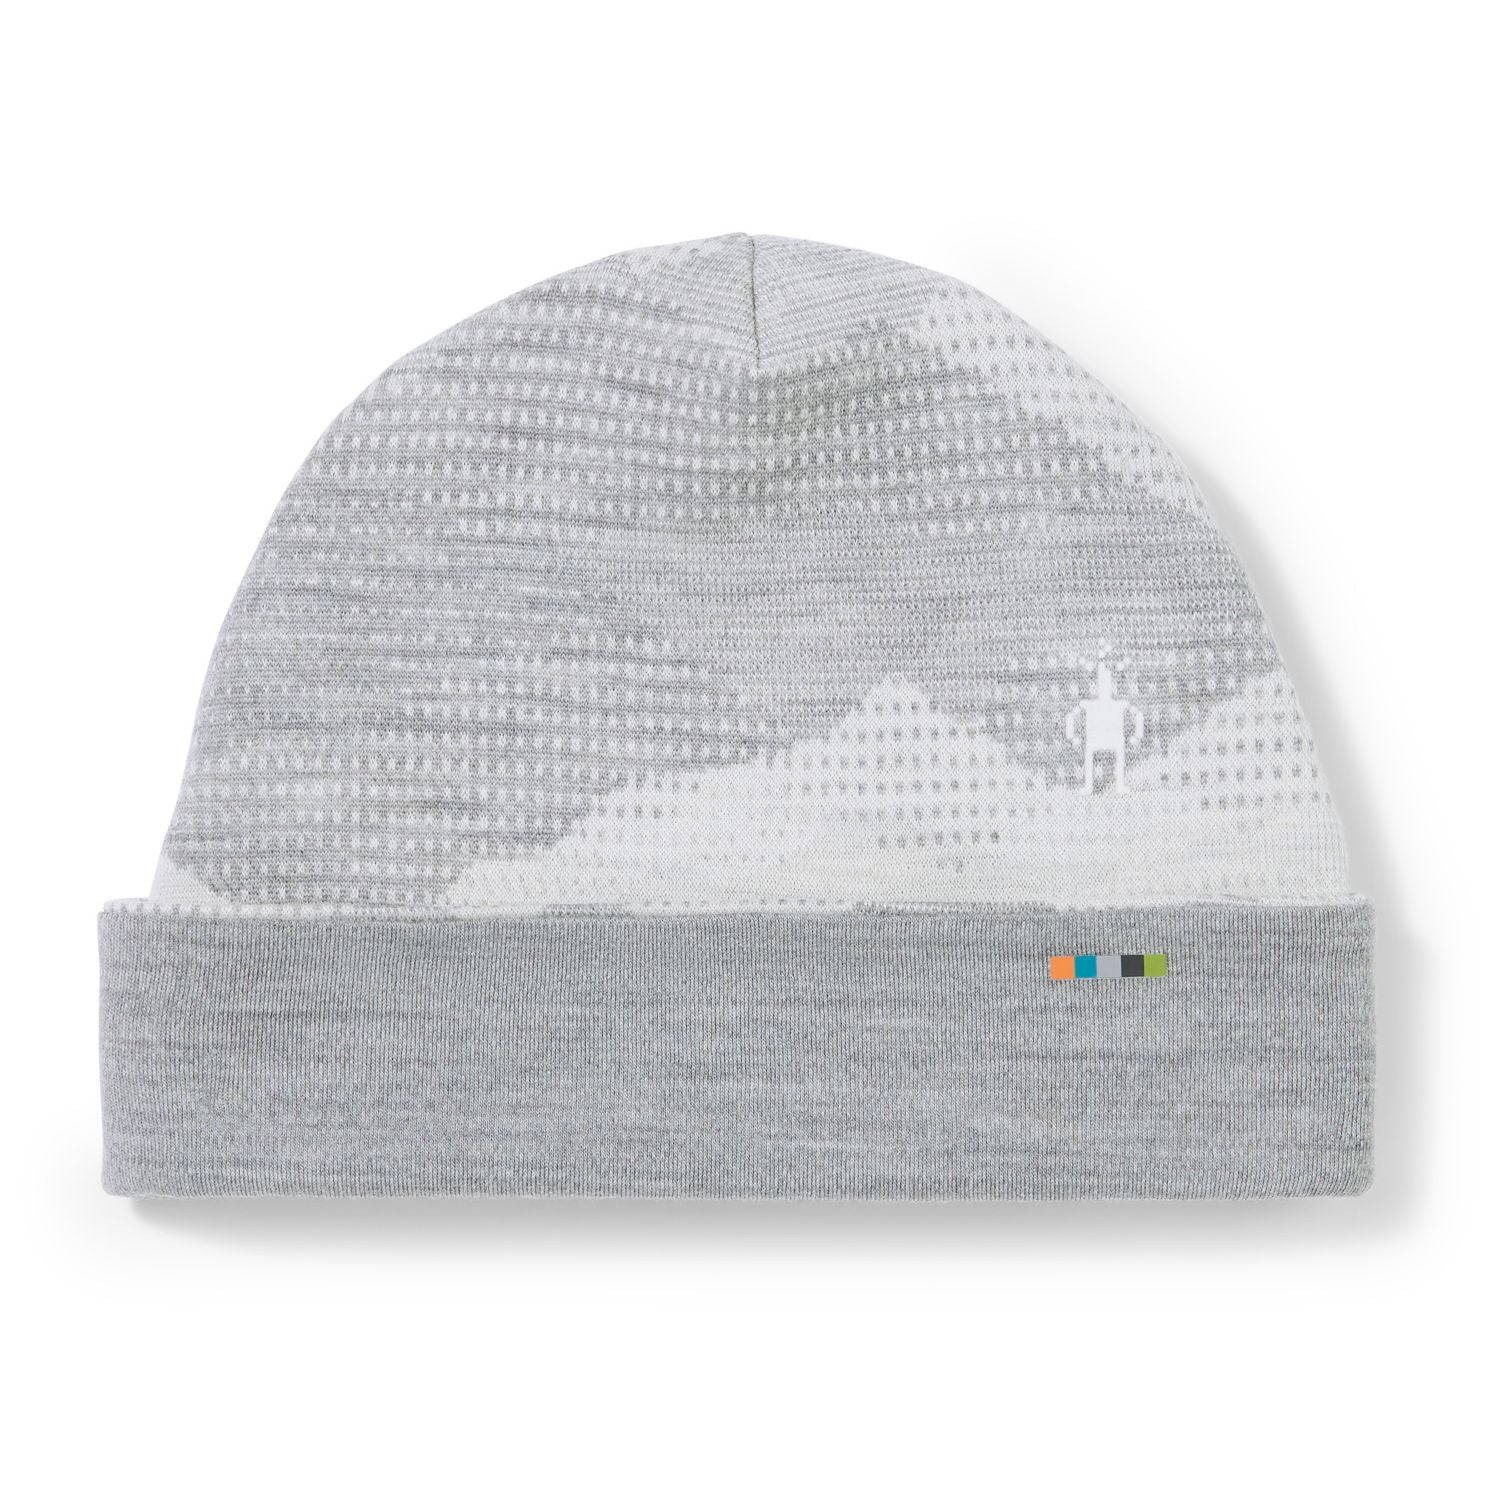 Smartwool Thermal Merino Reversible Pattern Cuffed Beanie Accessories Smartwool Light Grey Mountain Scape-K55  